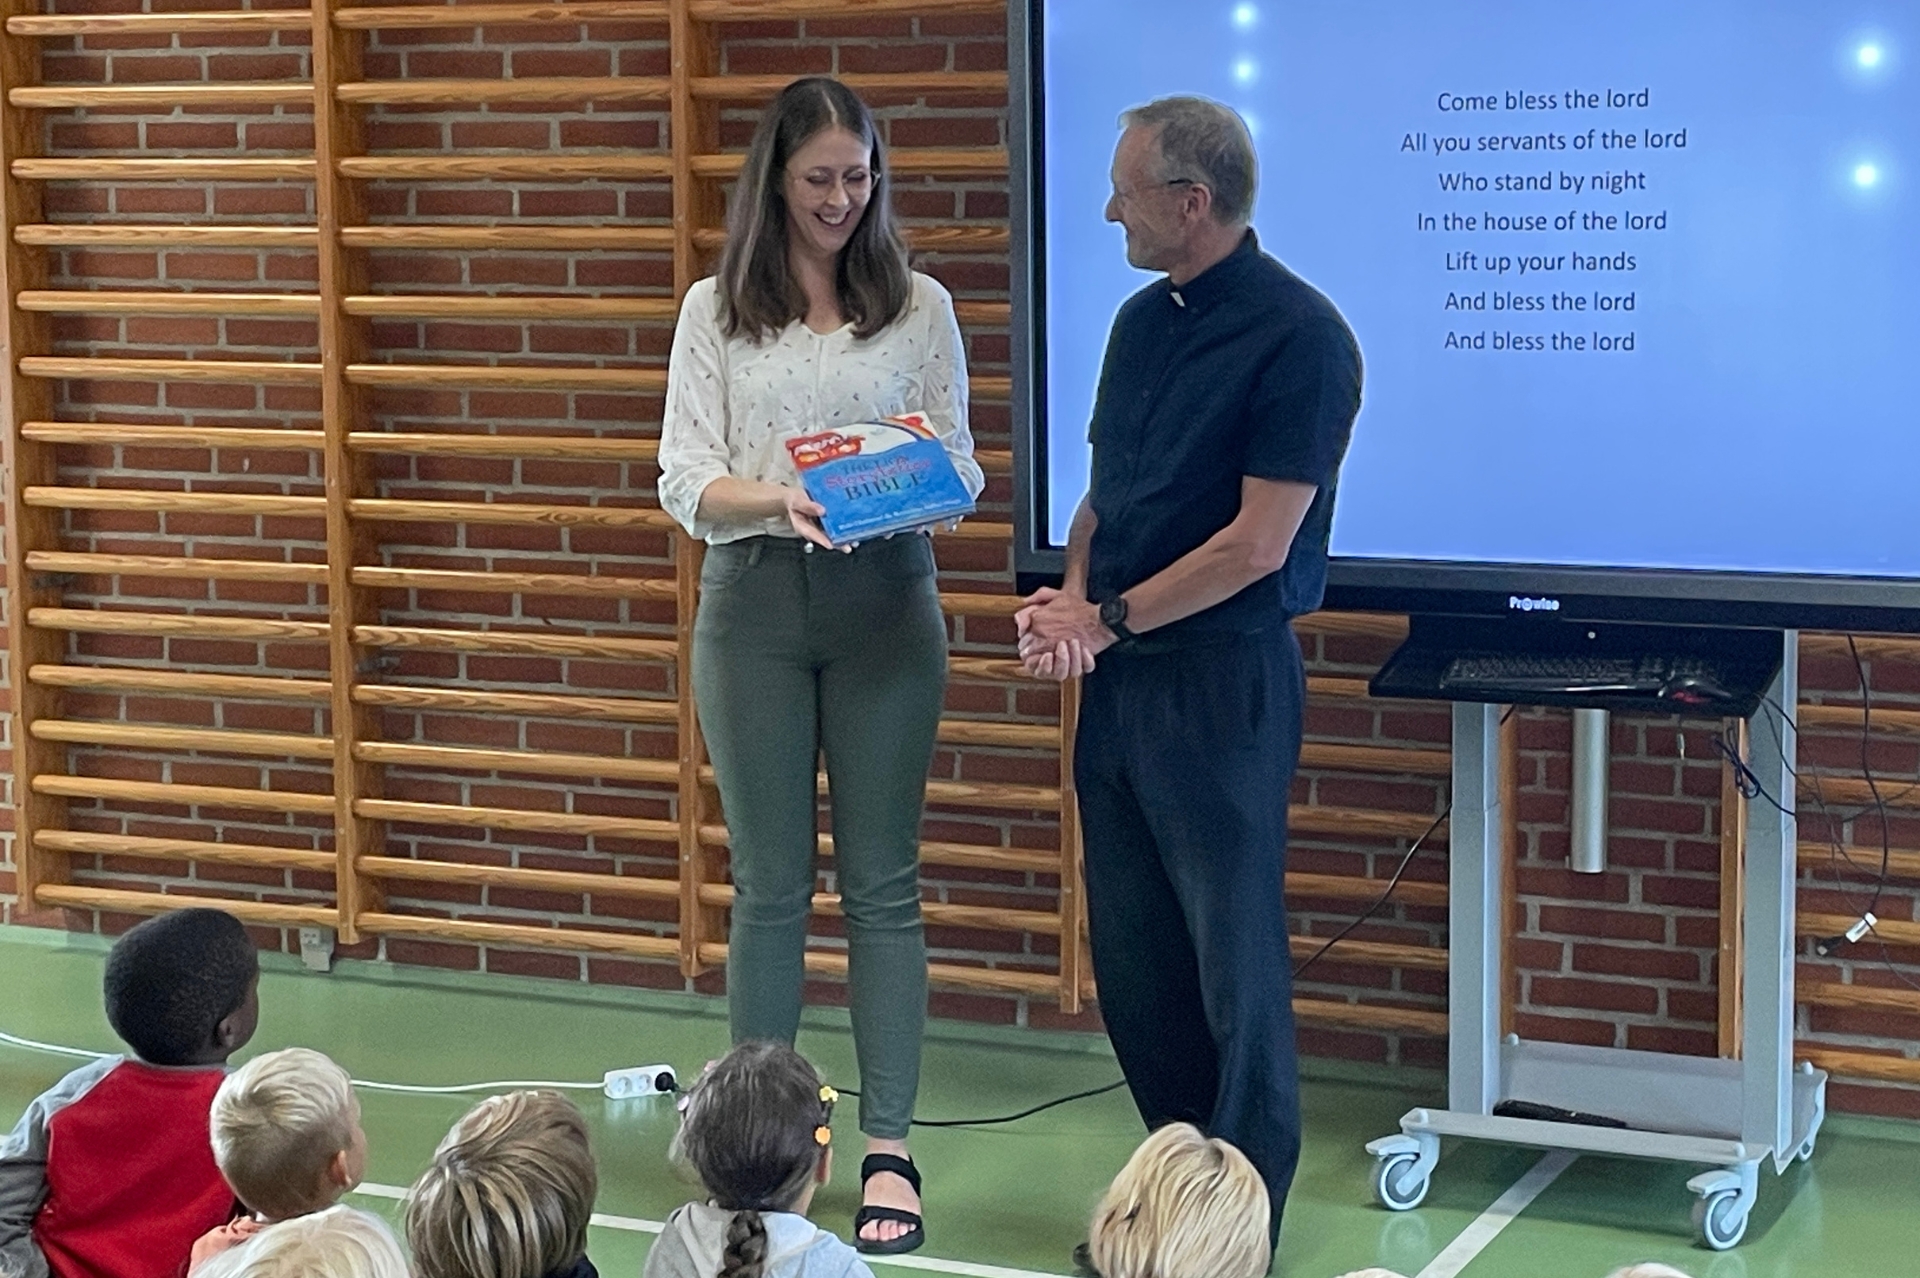 A priest and teacher stood at the front of a school assembly with the teacher presenting a children's book